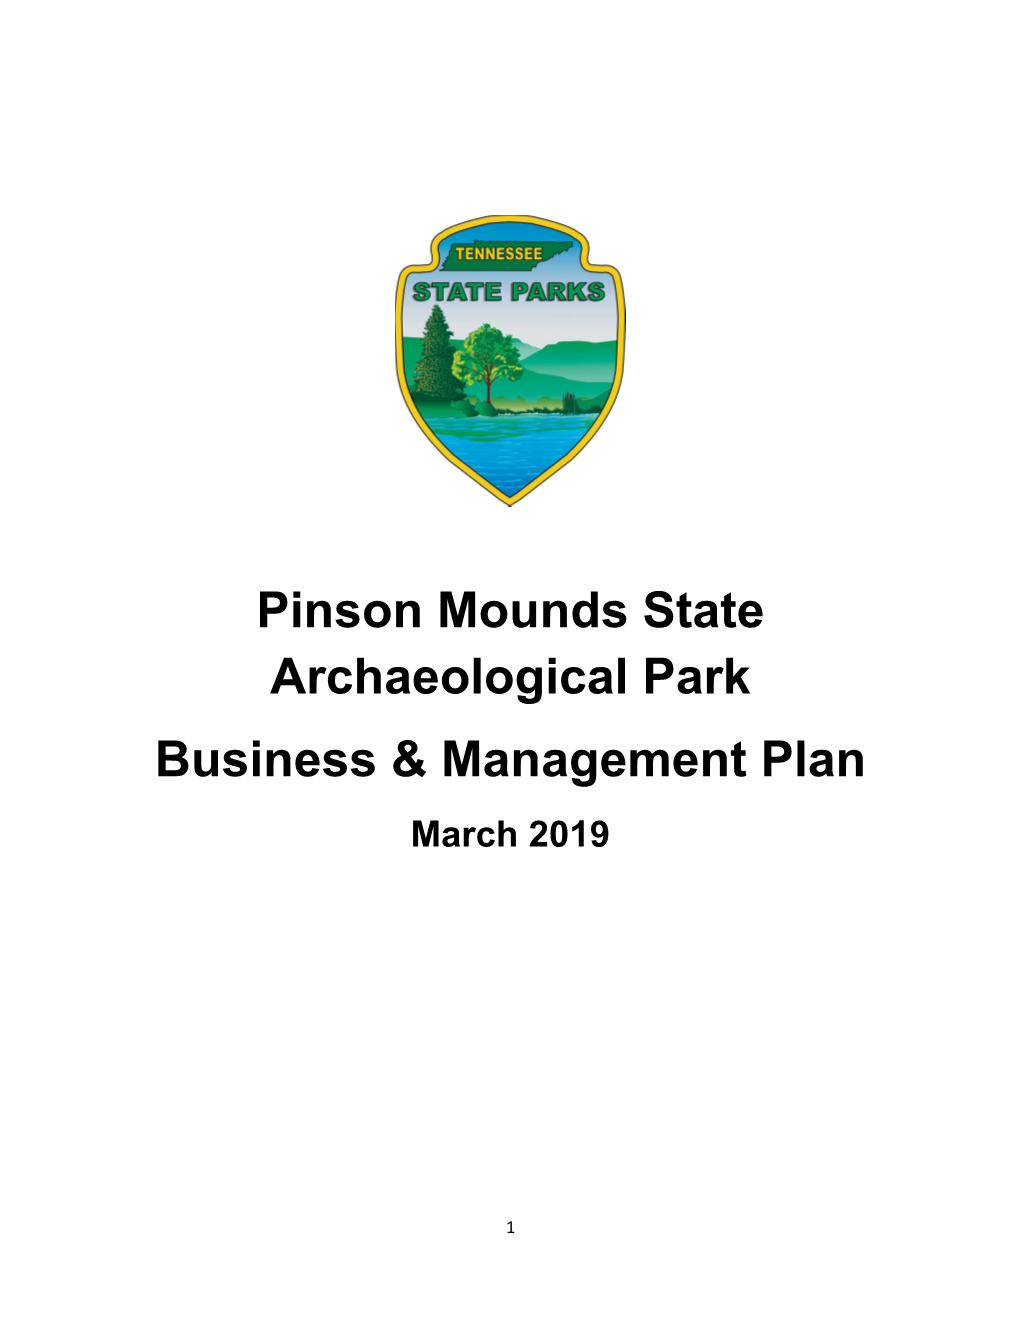 Pinson Mounds State Park Business Plan